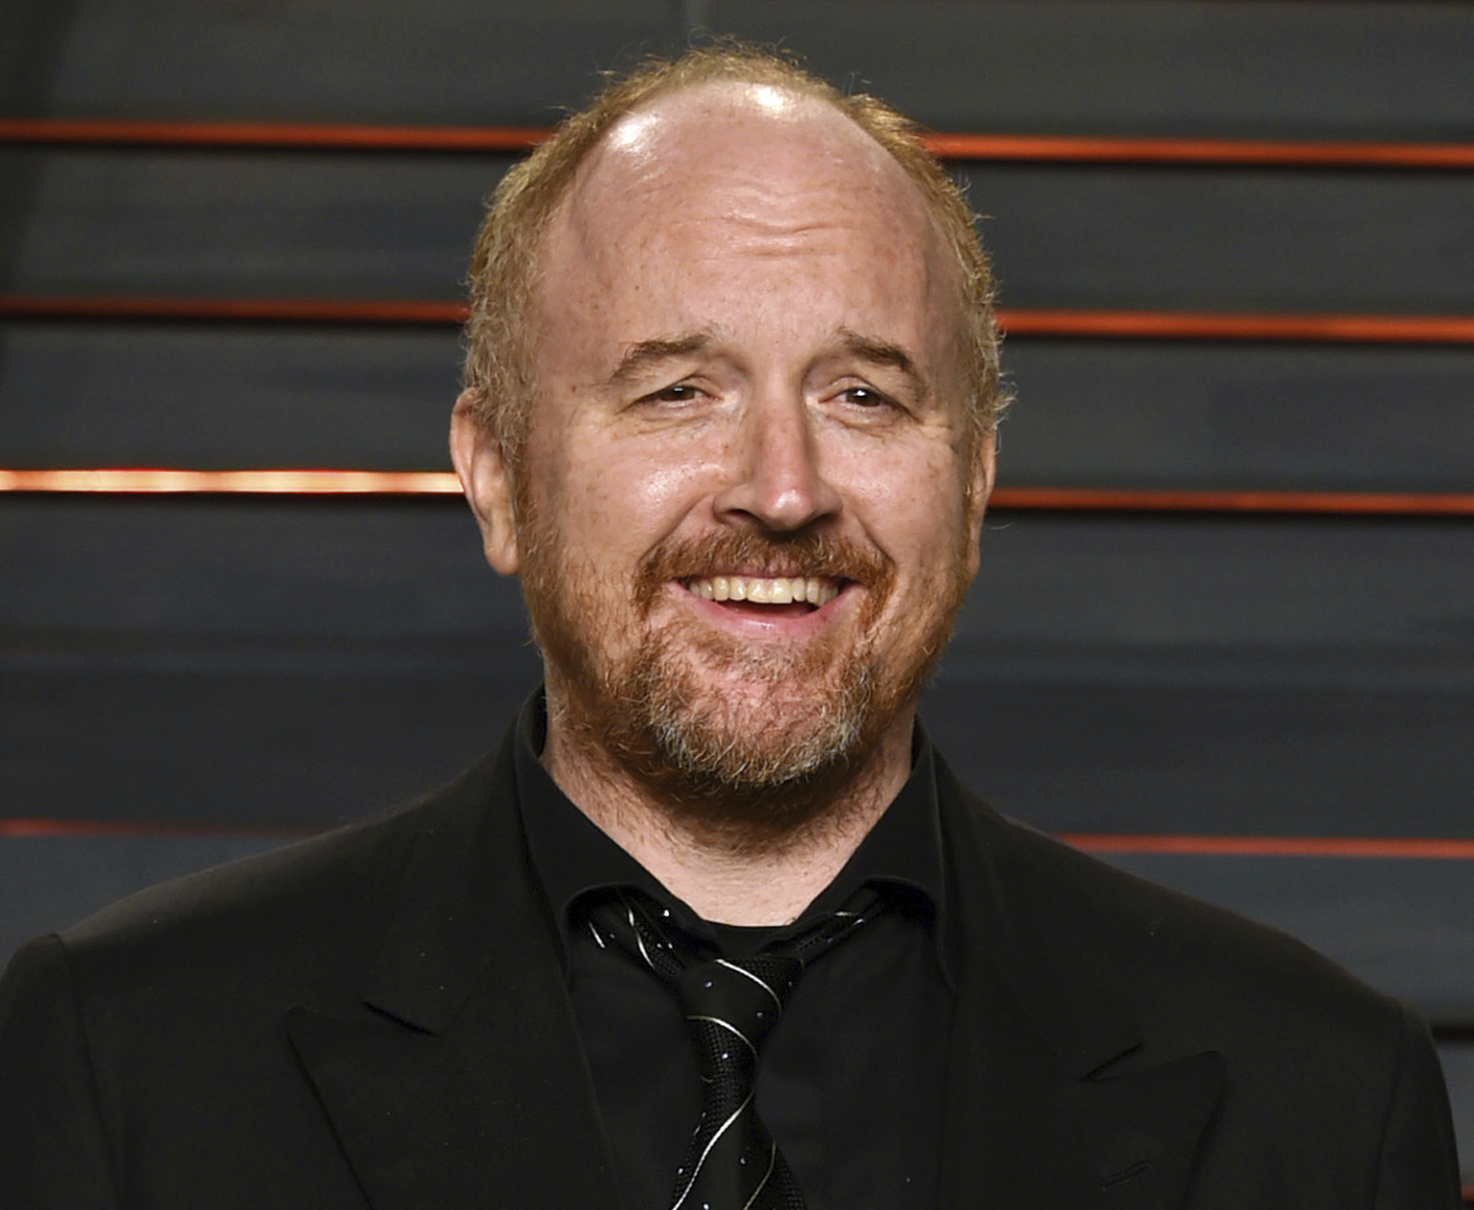 Louis C.K. has confessed. Now it’s time for contrition. America Magazine